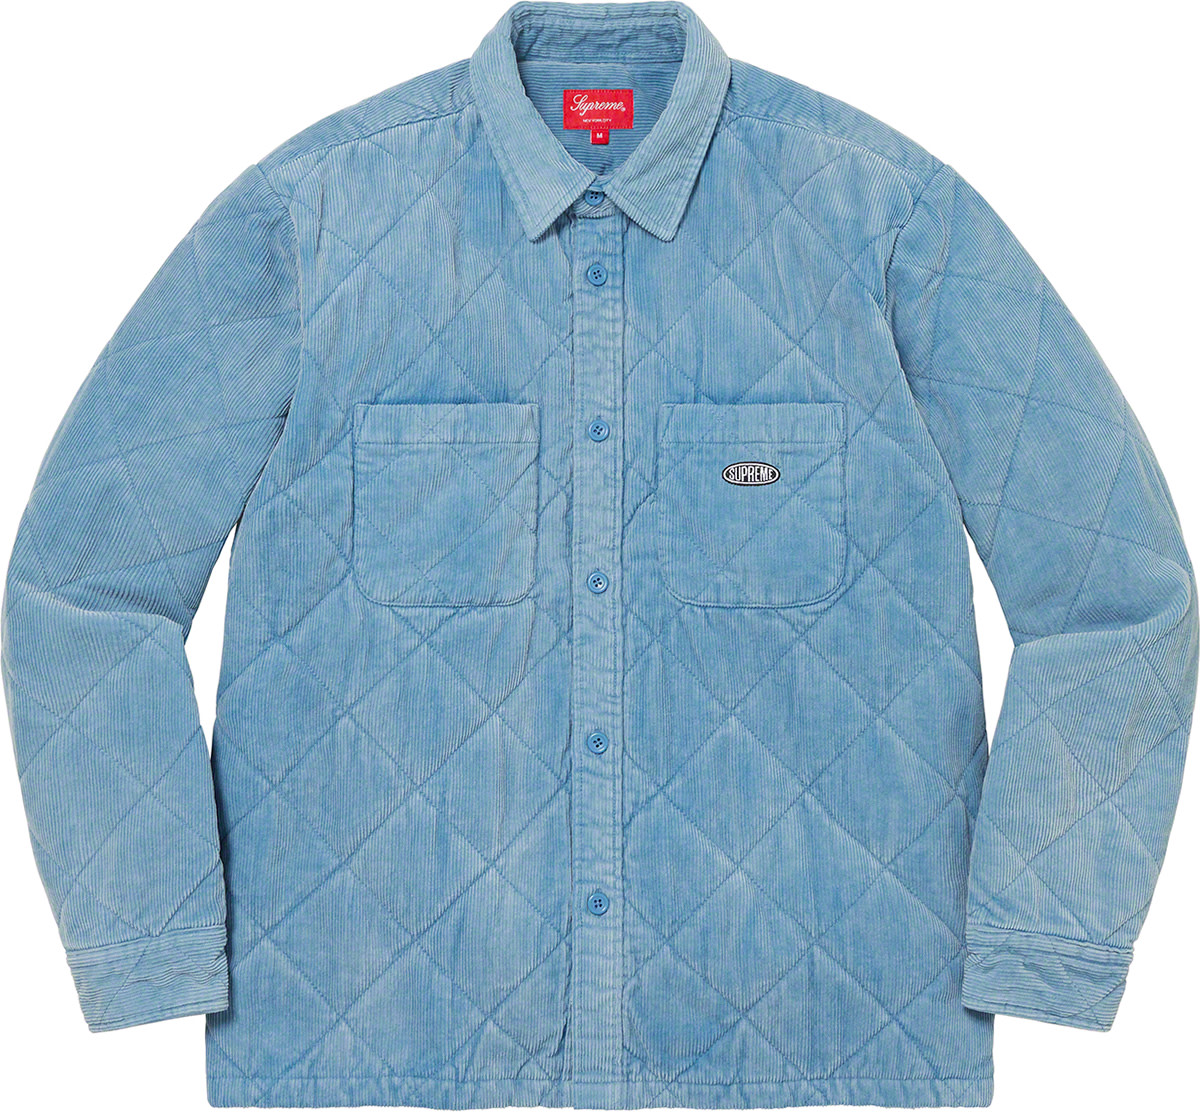 Supreme Quilted Corduroy Shirt | Supreme - SLN Official